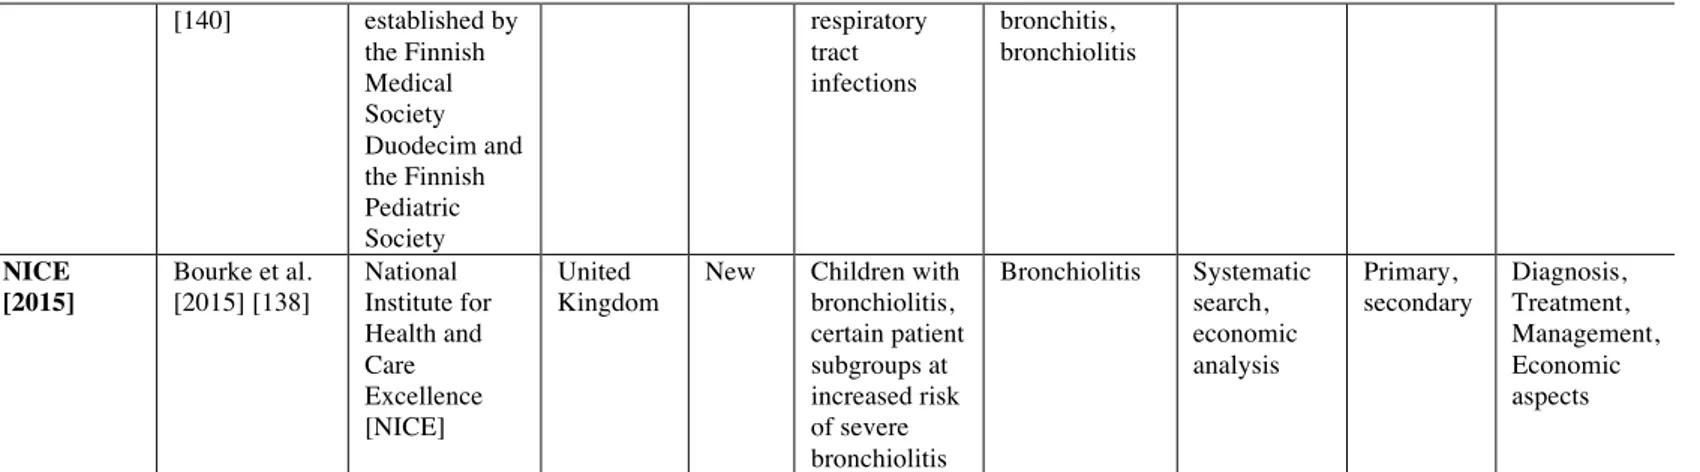 Table  3  summarizes  the  recommendations  made  regarding  investigations  for  diagnosis  and  management  of  bronchiolitis